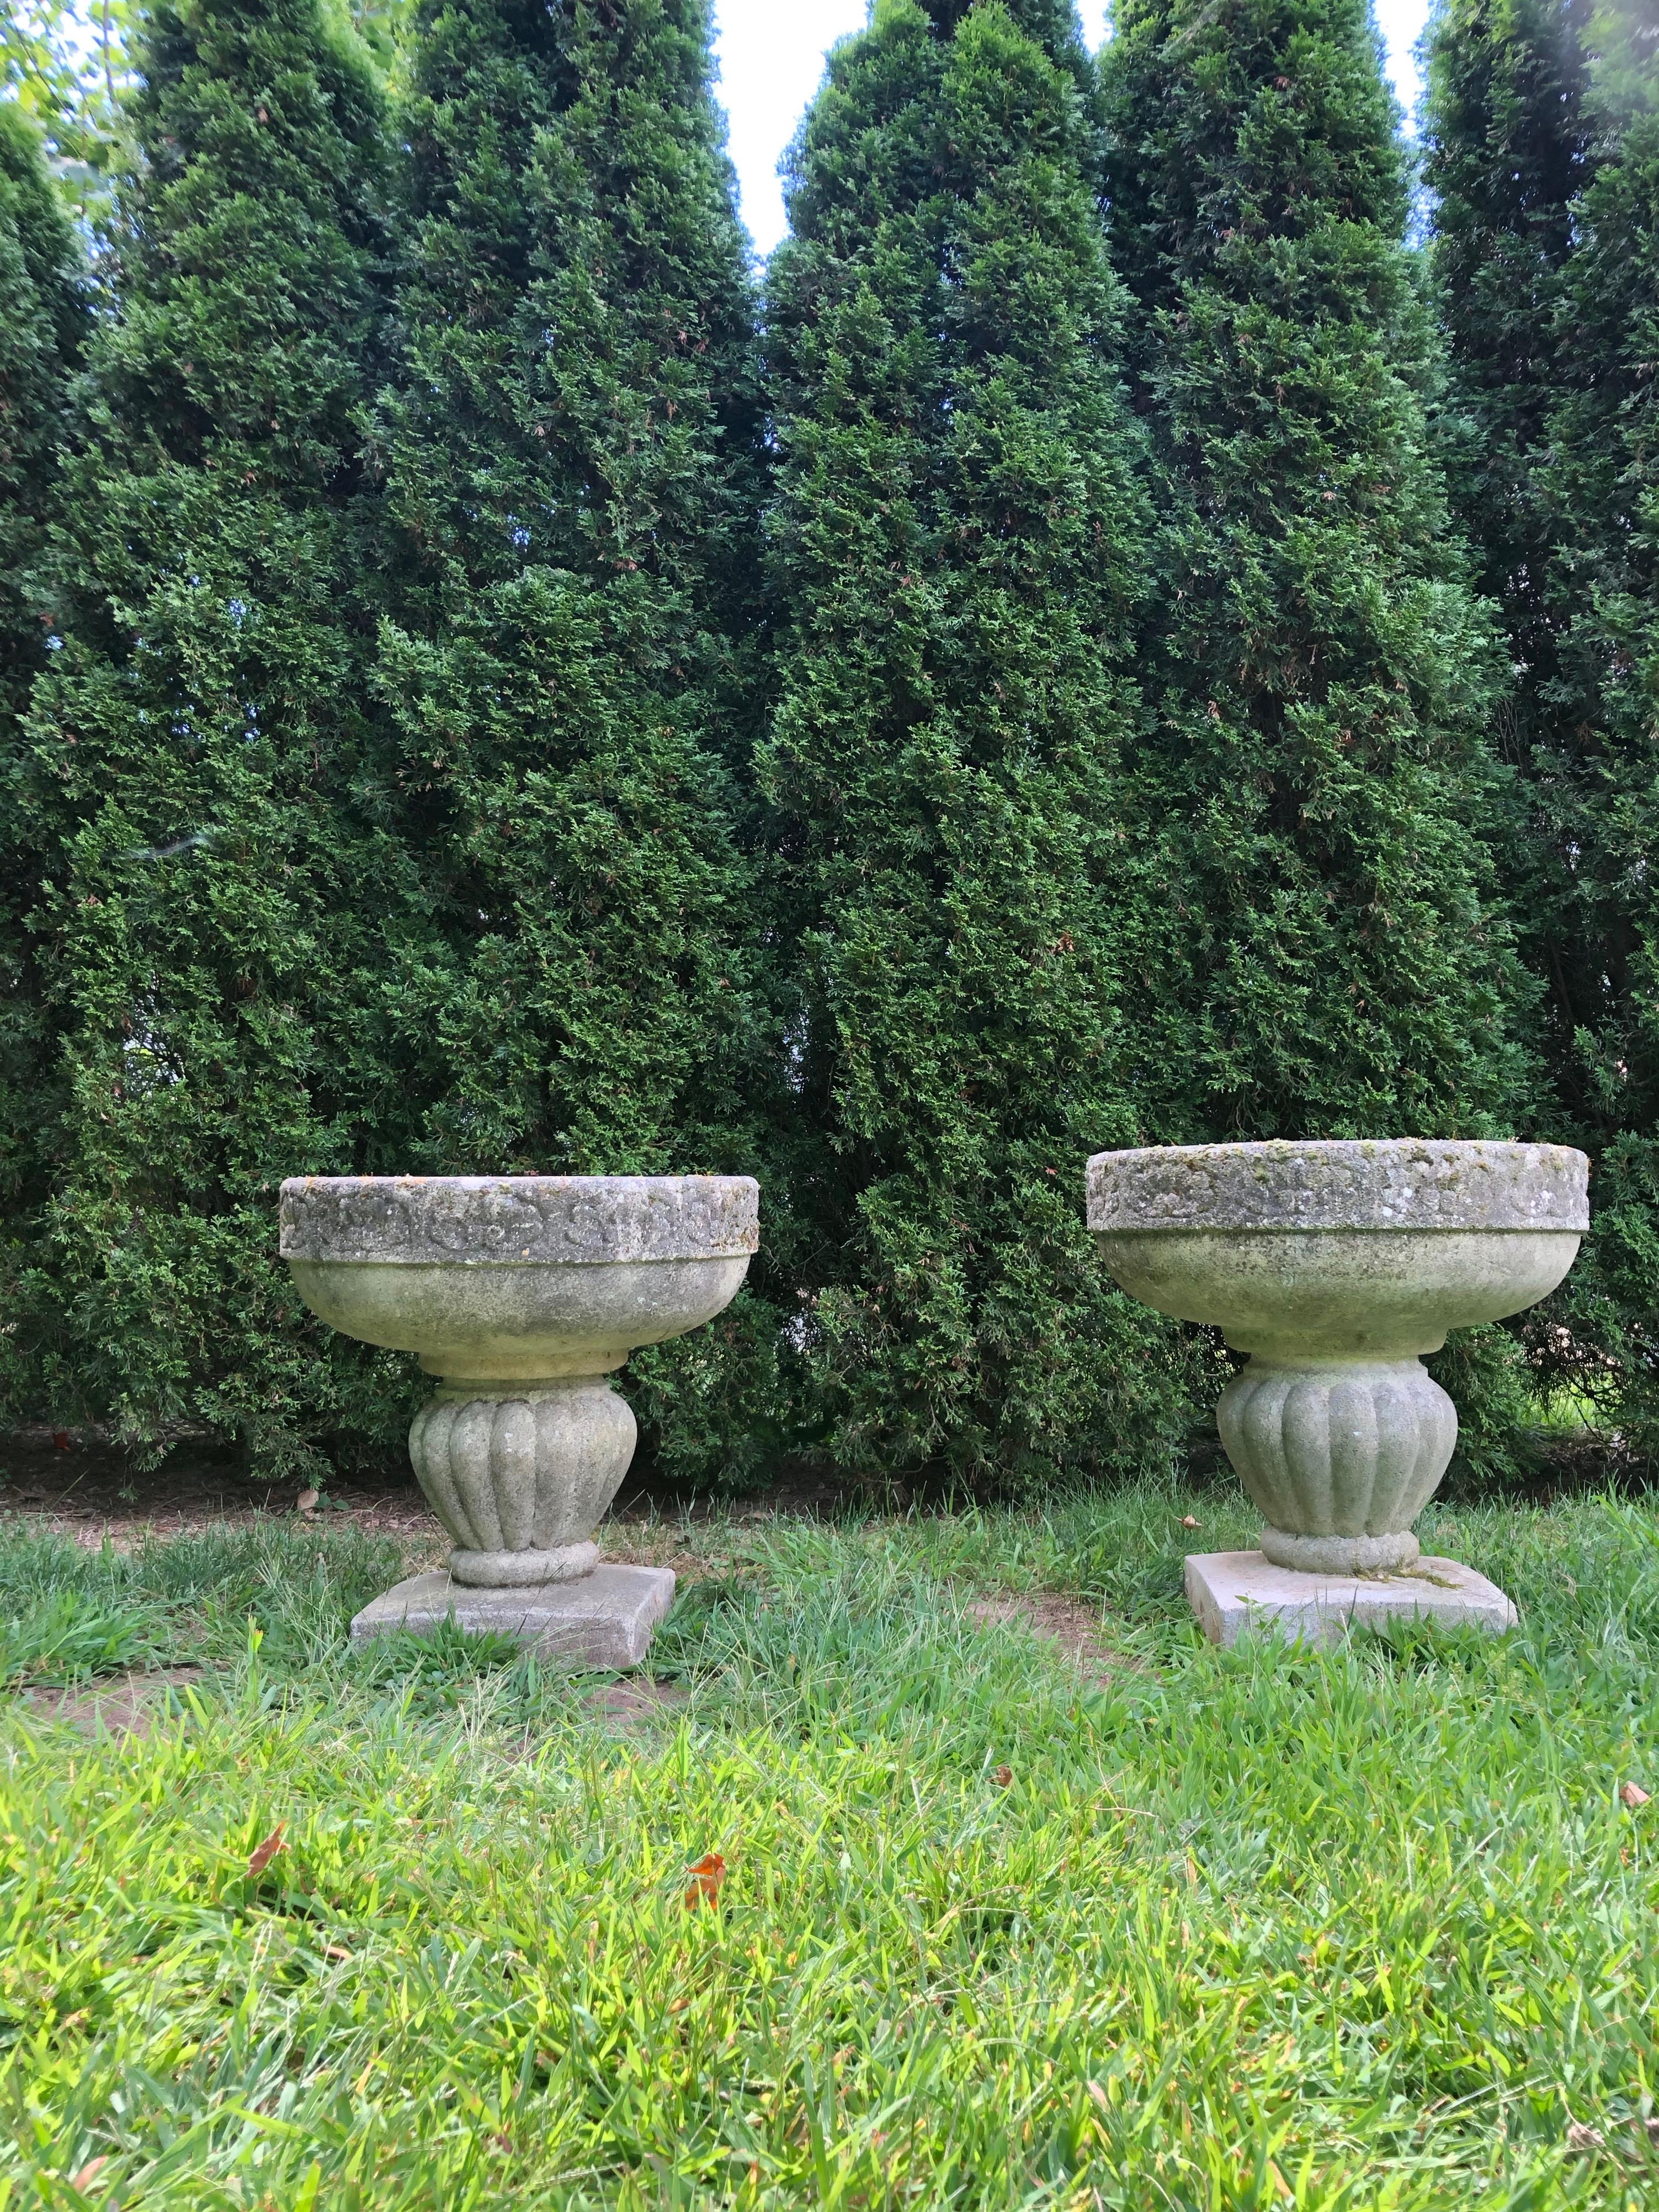 These commodious planters will make a real statement flanking your front door or entrance to your garden. With large planting bowls and a great weathered and mossy patina, they are in excellent vintage condition with only a small chip to one corner